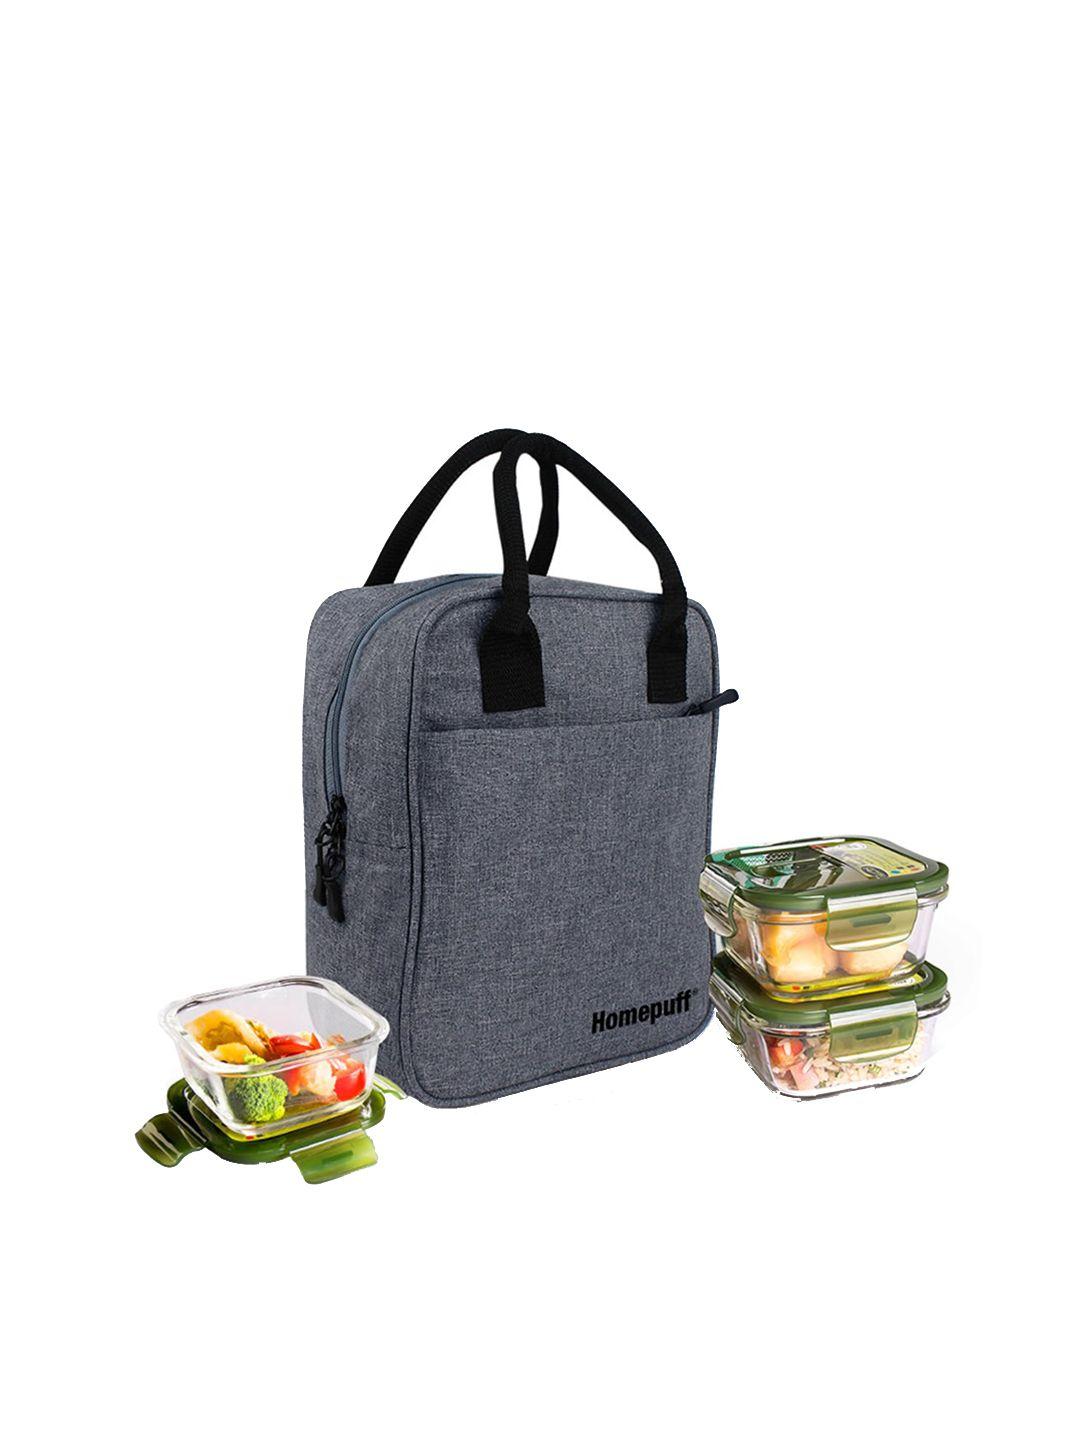 home puff grey solid tiffin lunch bag